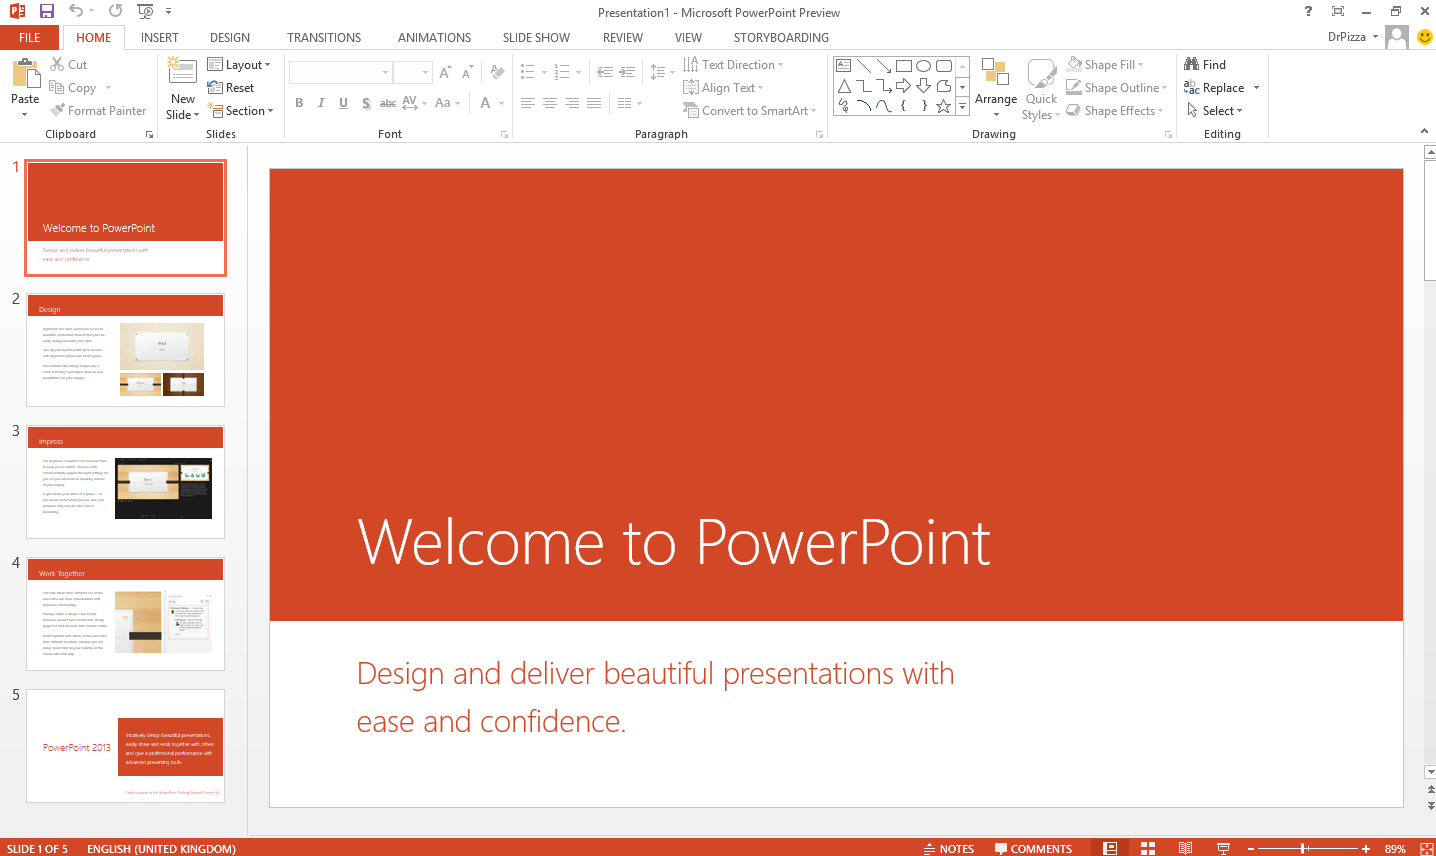 powerpoint presentation download in pc